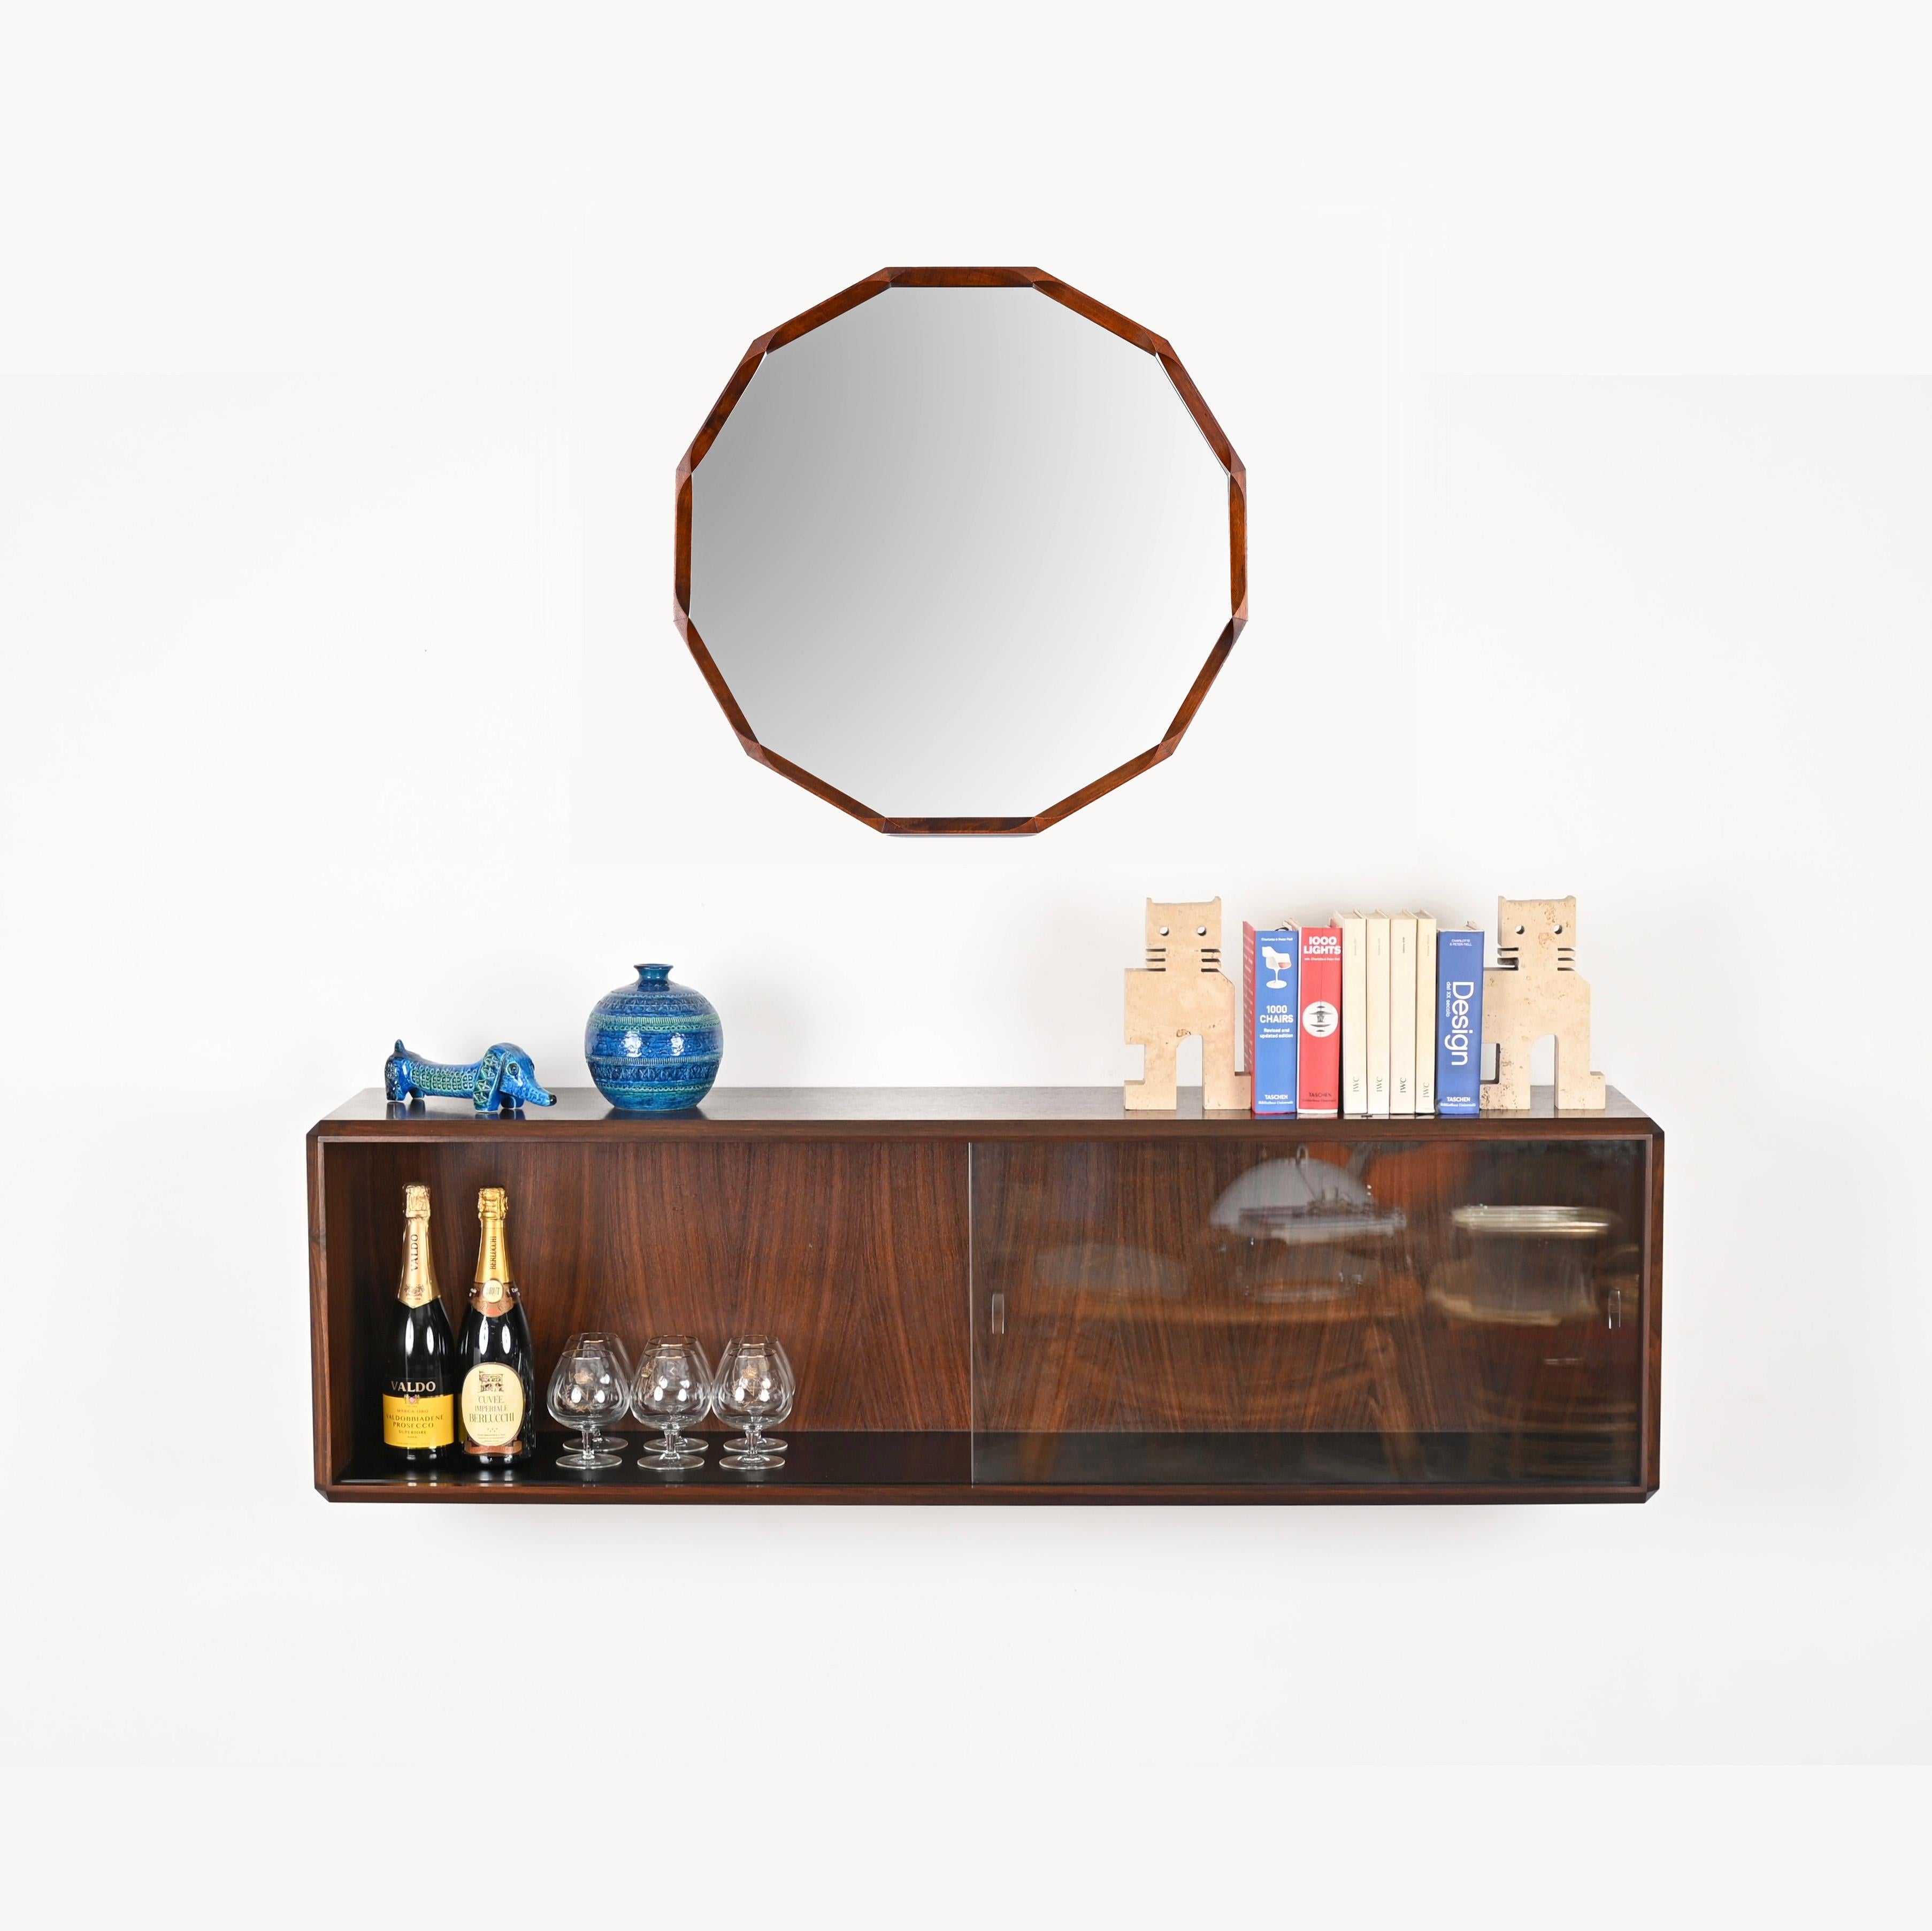 Marvellous Italian showcase in wood with sliding crystal glasses. This elegant and versatile object was designed by Dino Cavalli in Italy during the 1970s. 

The quality of the wood used on this showcase is outstanding, with marvelous grain. The